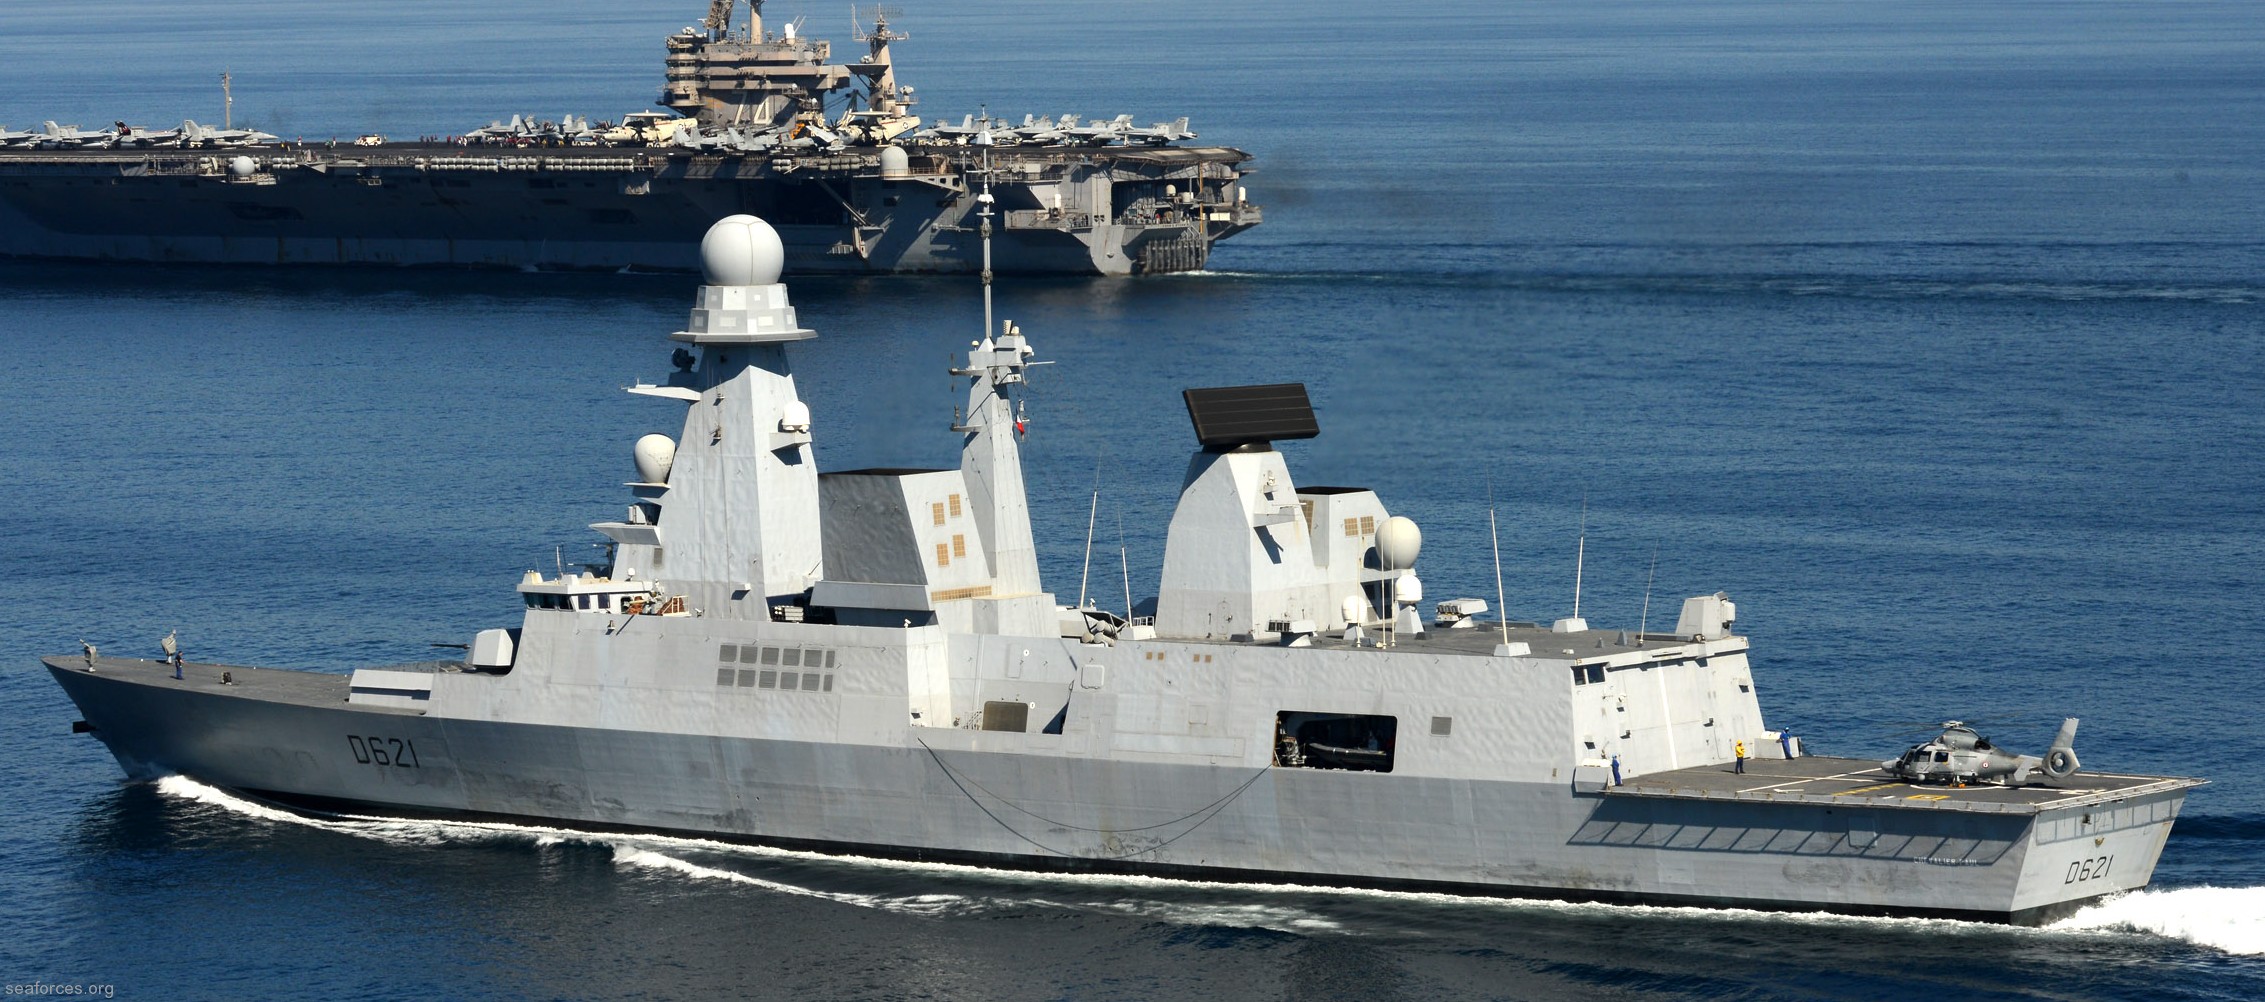 forbin class horizon guided missile air defense frigate d-621 chevalier paul french navy marine nationale 04x